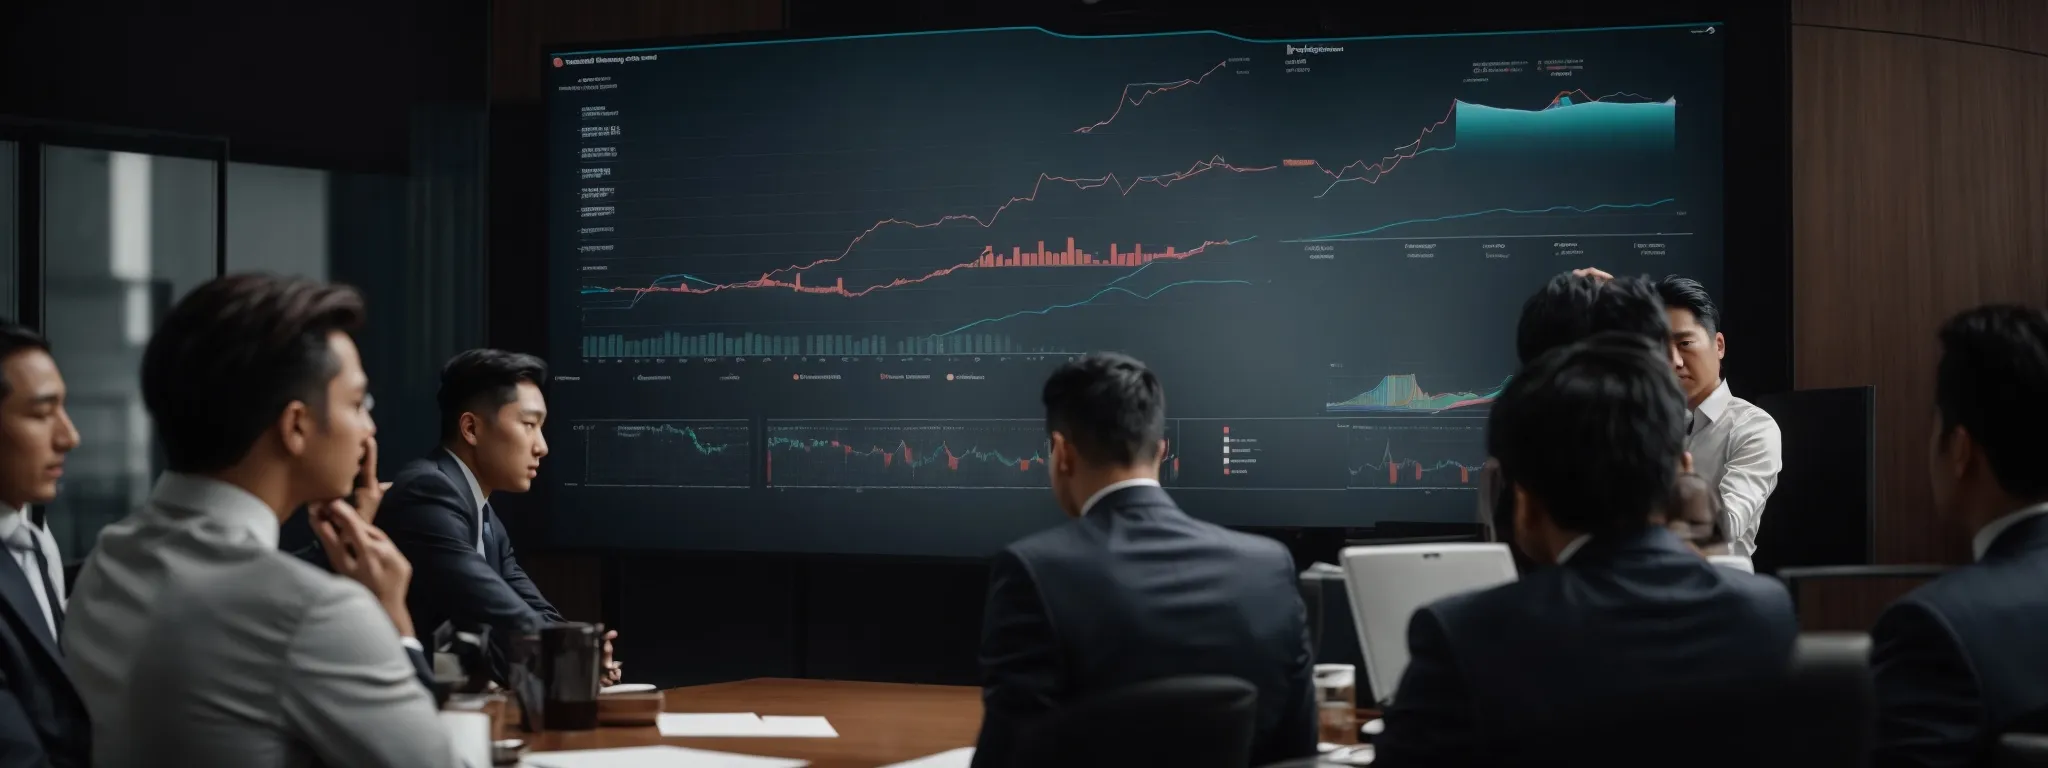 a business meeting with professionals discussing charts and graphs on a large presentation screen.